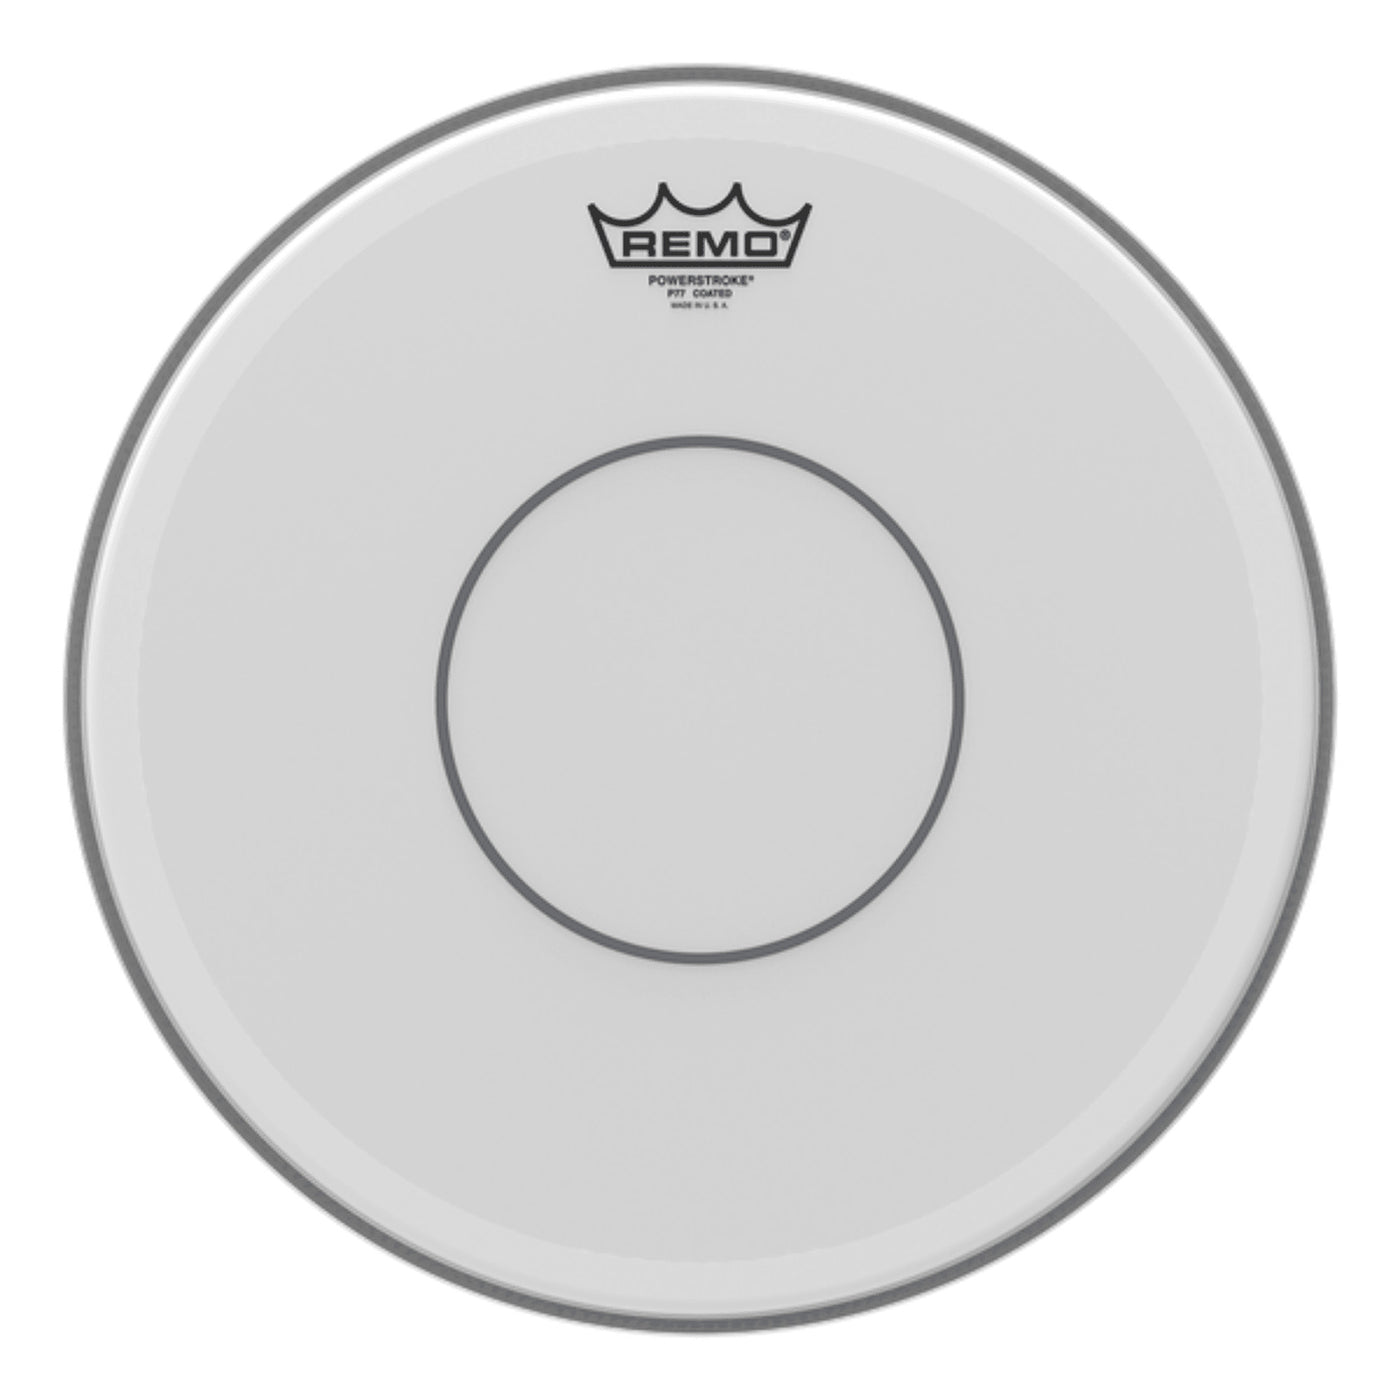 Remo P7-0114-C2 14" Powerstroke 77 Coated Drum Head with Clear Dot